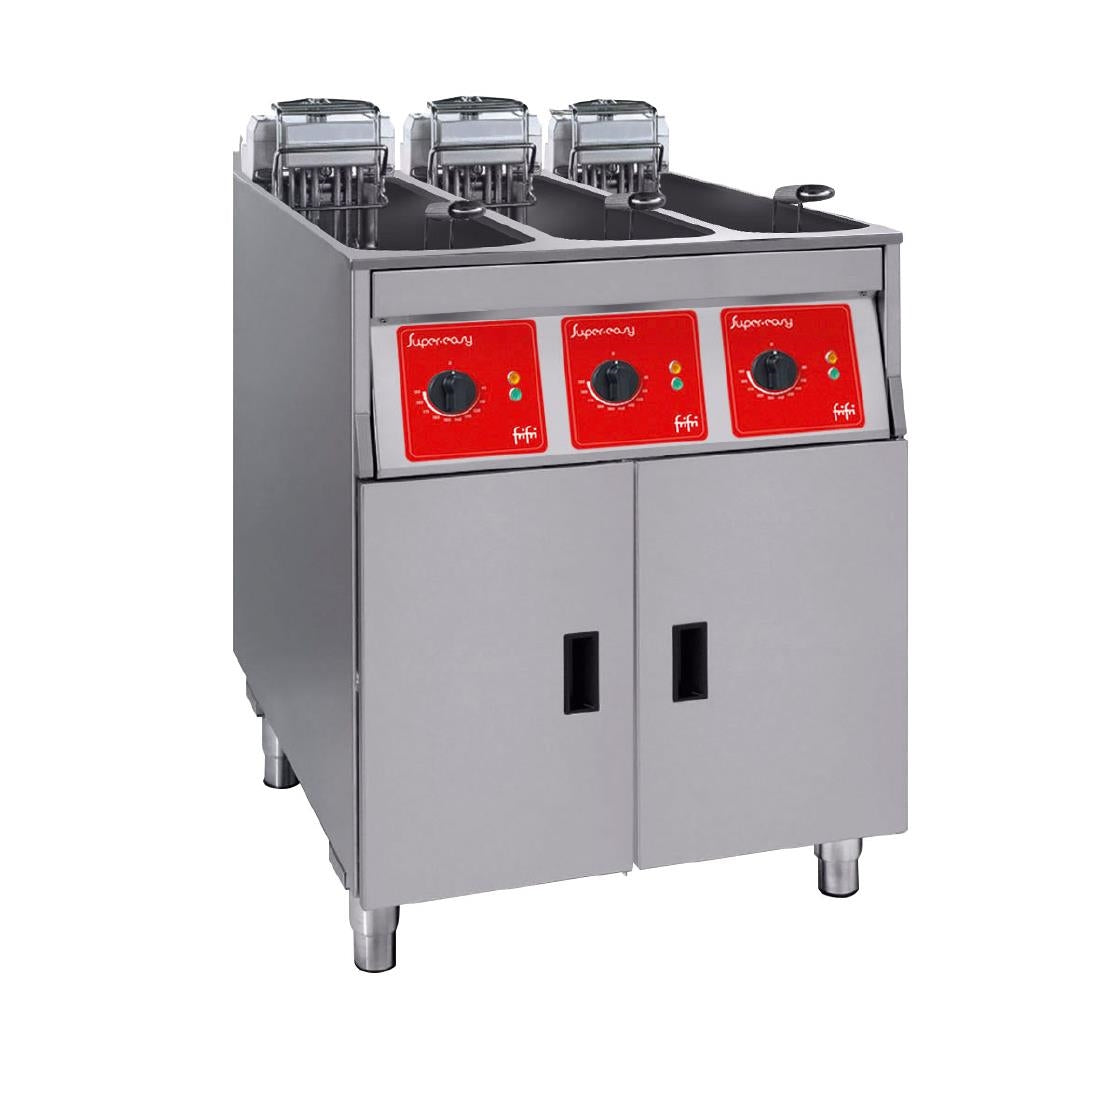 HS076-3PH FriFri Super Easy 633 Electric Free-standing Fryer Triple Tank Triple Basket with Filtration 3x11kW Three Phase